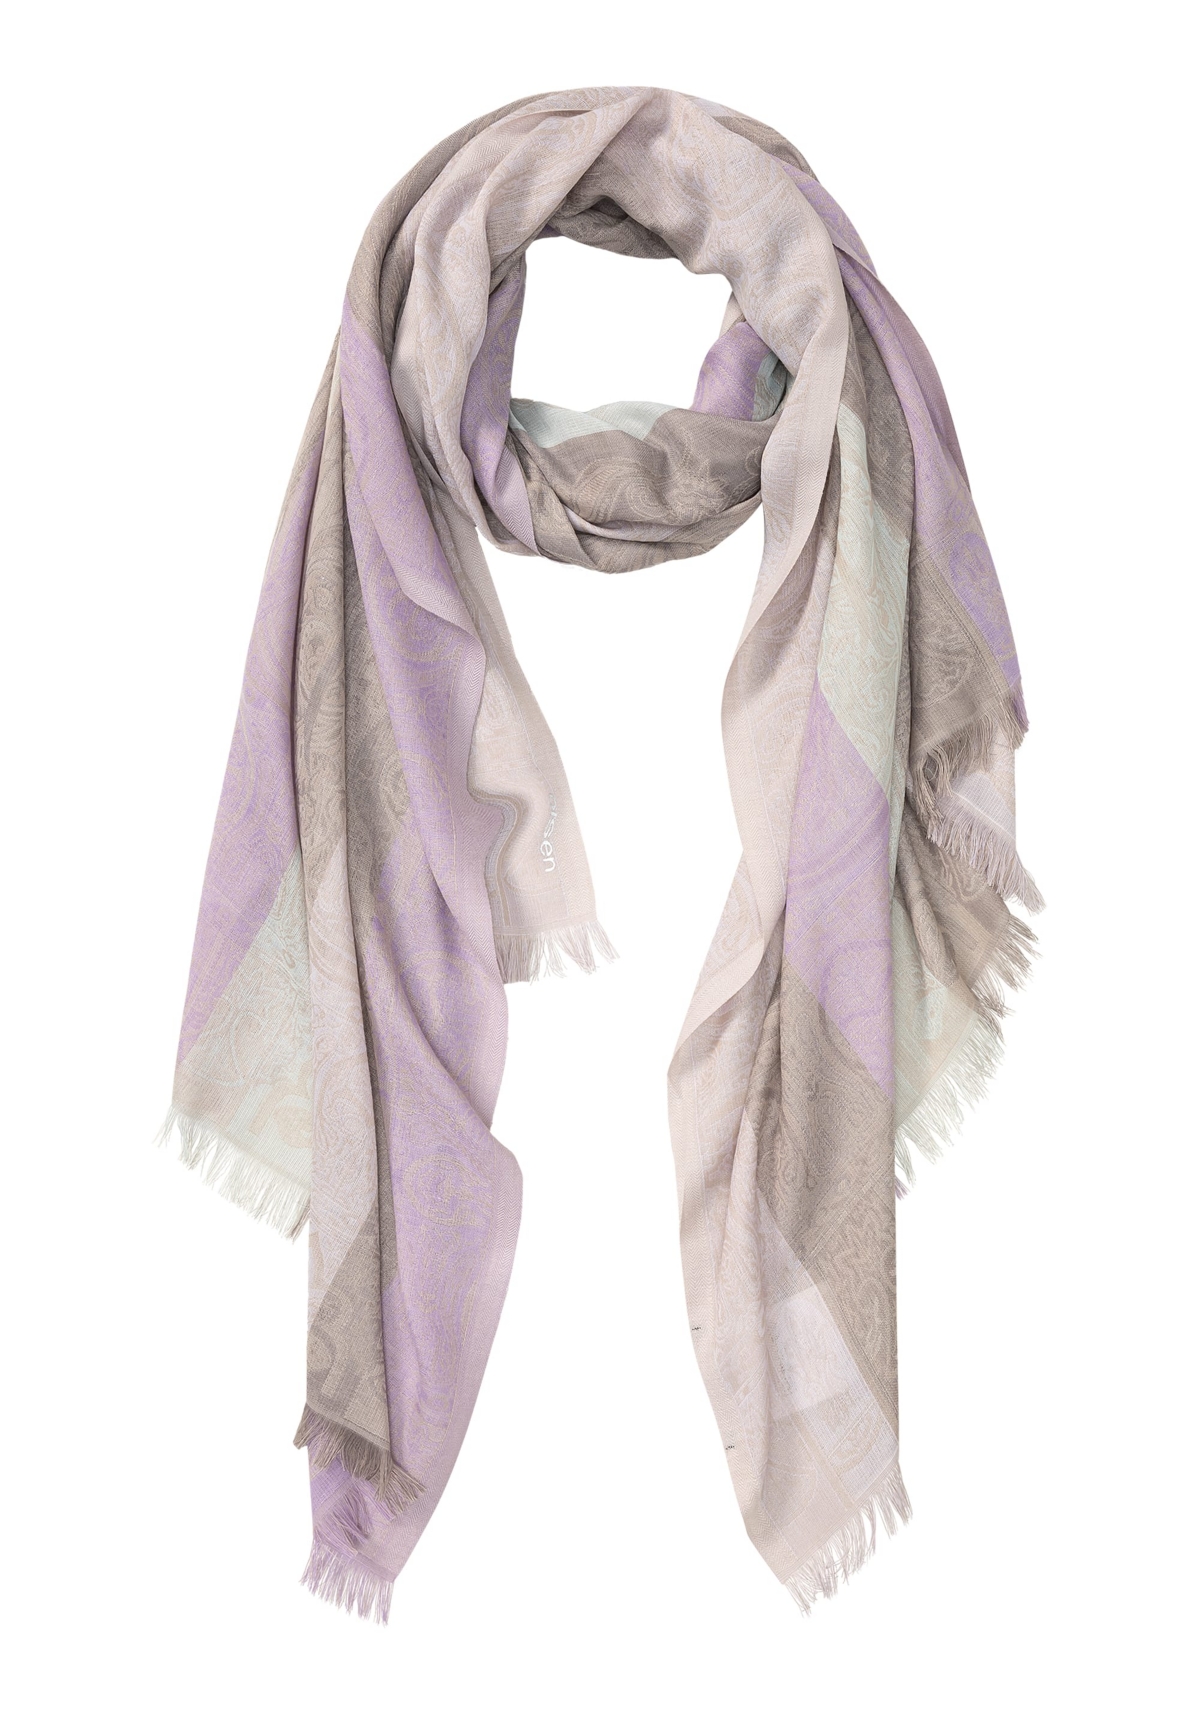 Woven Paisley Mid-Size Scarf with Frayed Edge Trim - Dark orchid